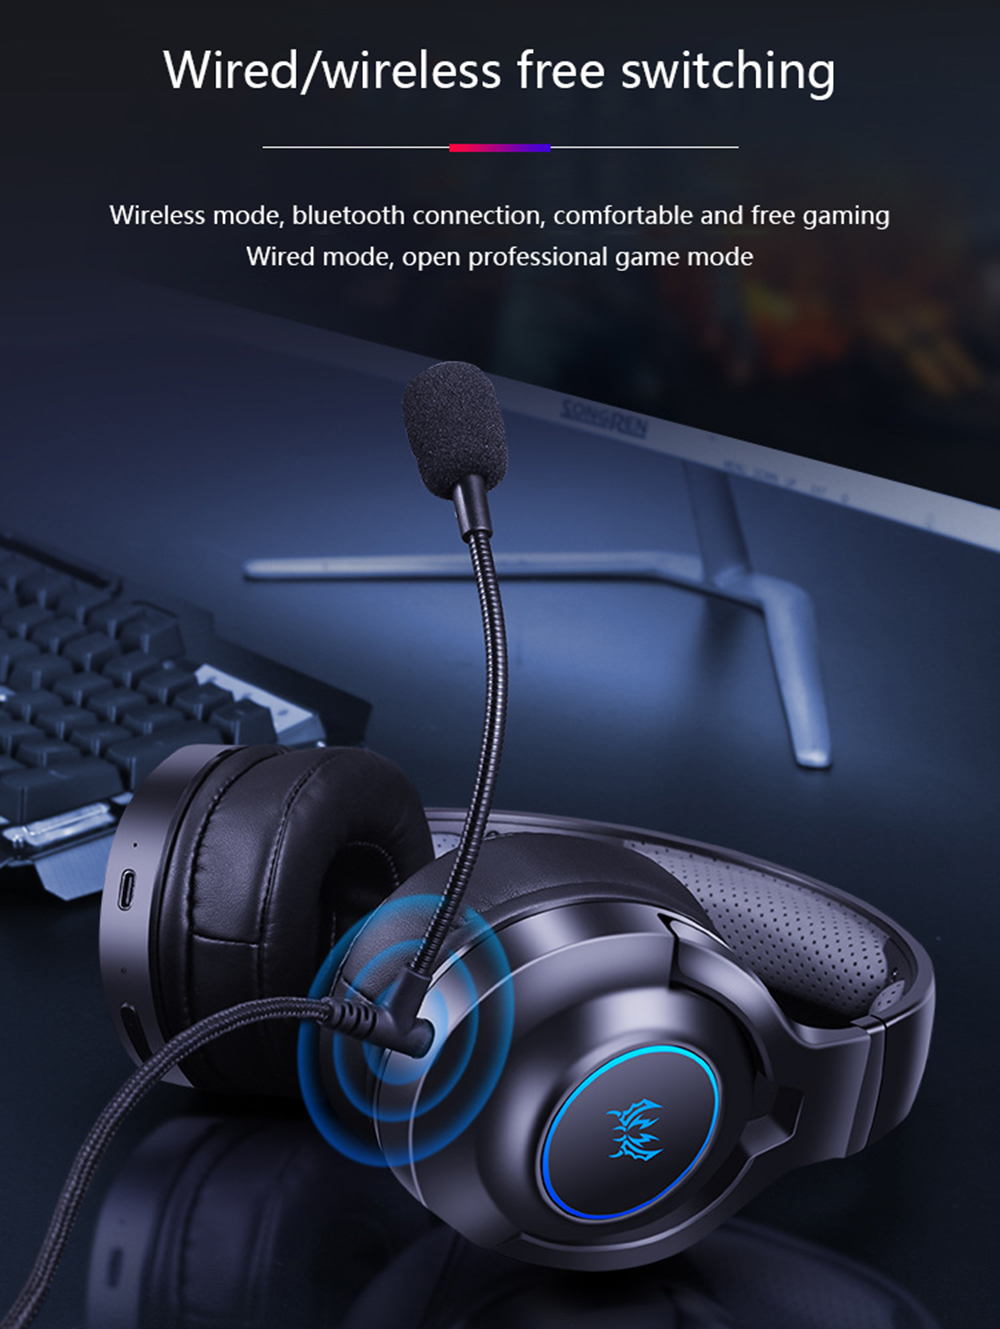 KOTION-EACH-B3520-bluetooth50-Gaming-Headset-Wired-Wireless-40mm-Driver-Unit-10m-Unimpeded-Connectio-1817350-2